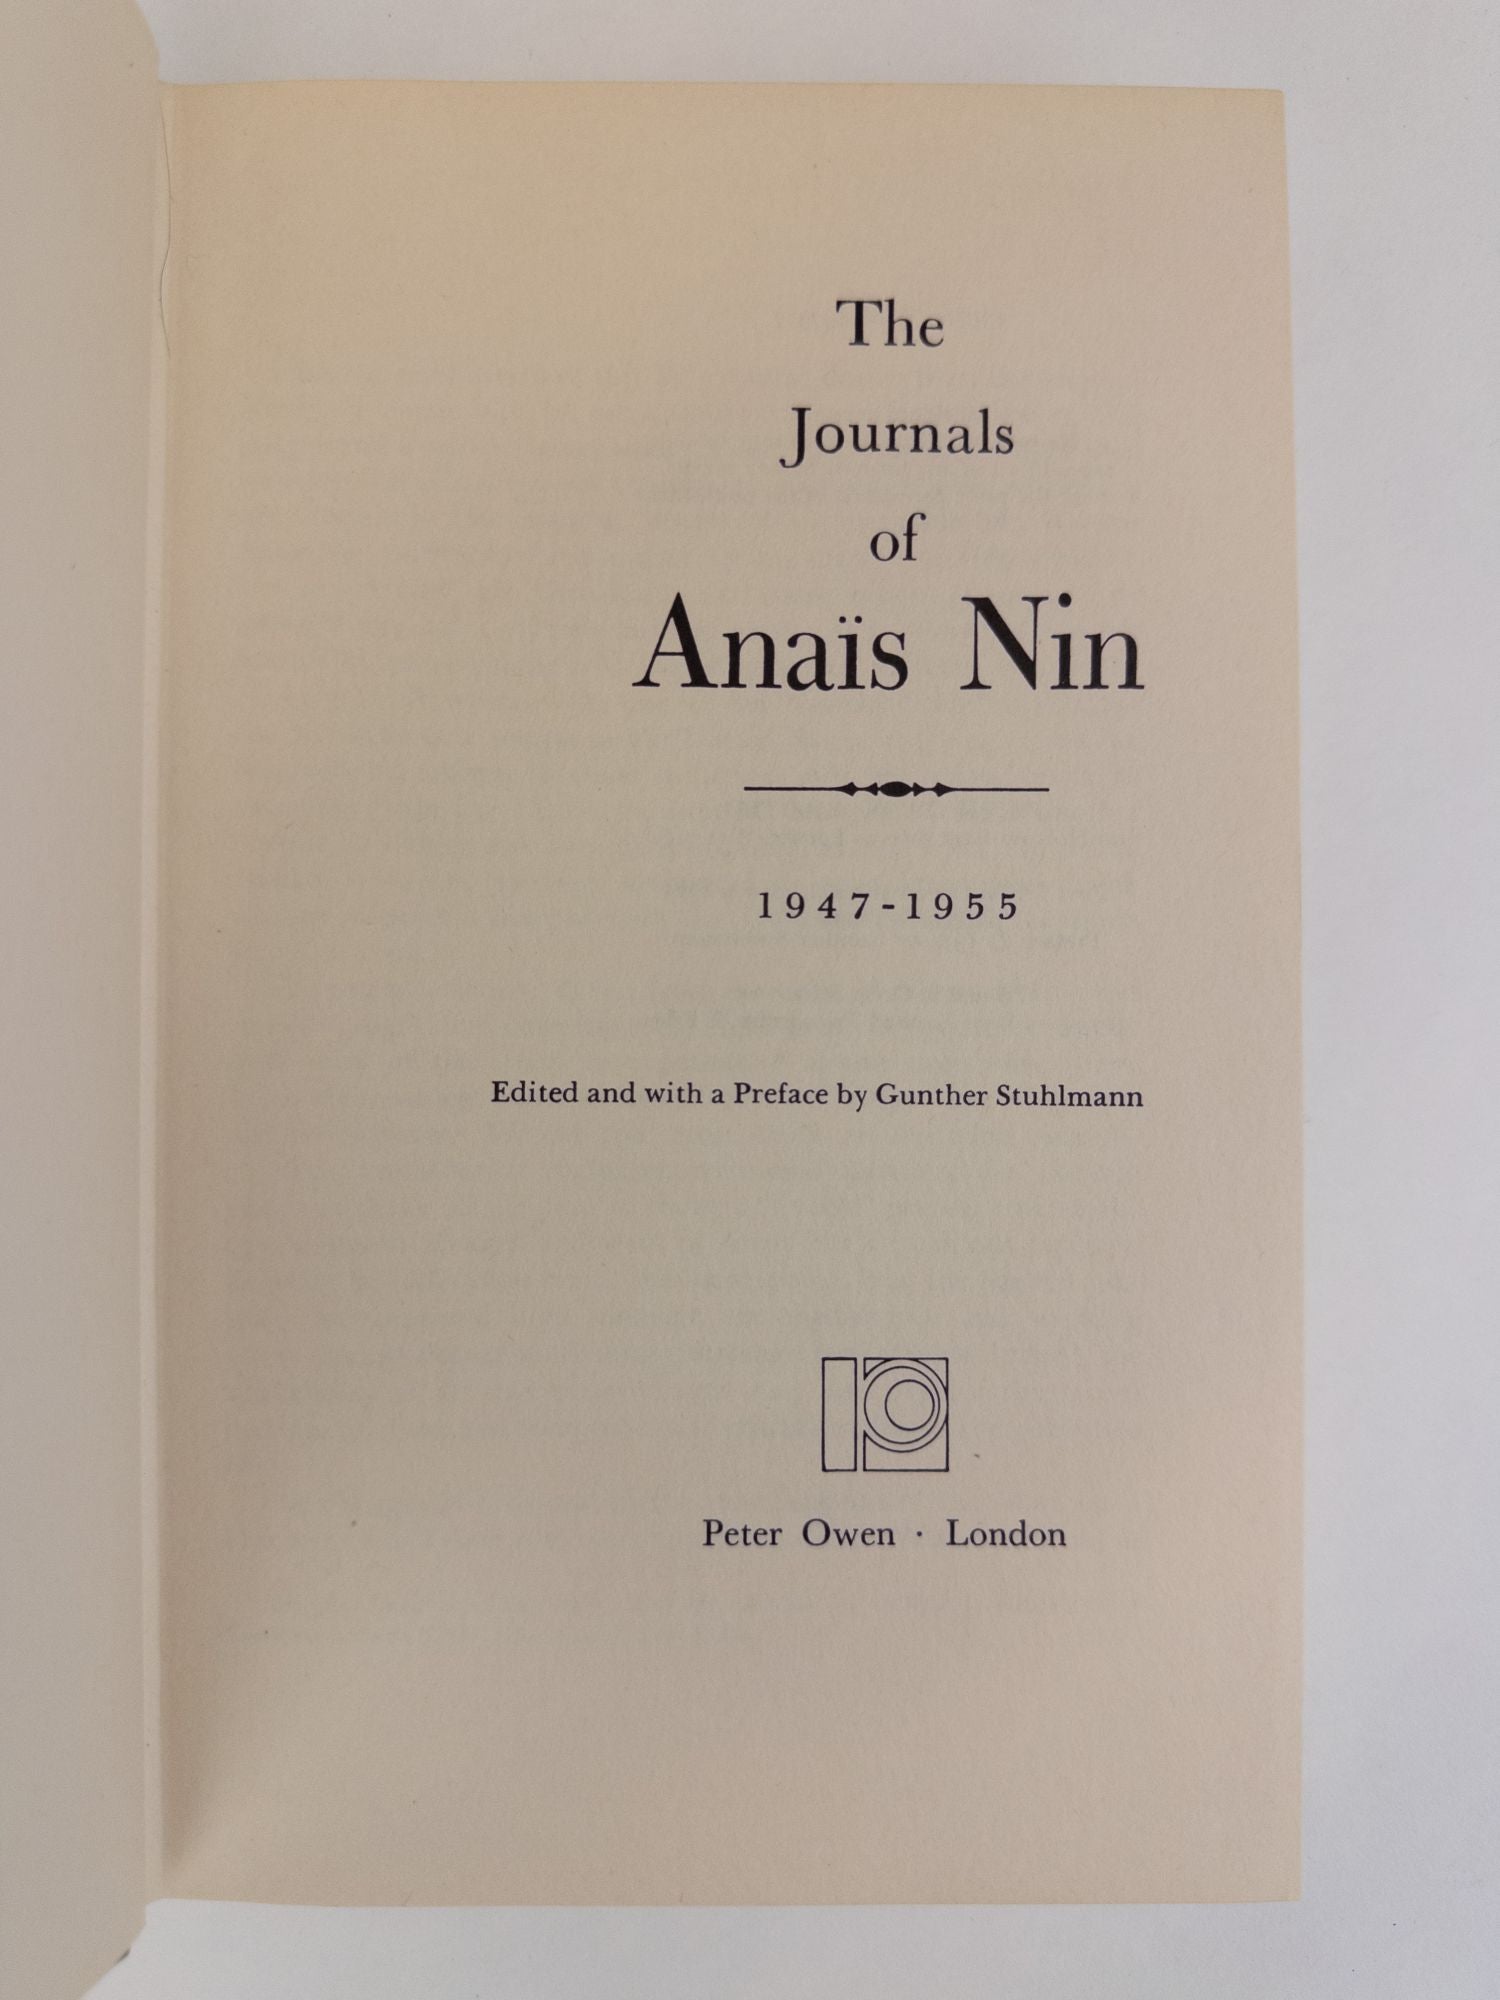 Product Image for THE JOURNALS OF ANAIS NIN - 1947-1955 [Volume Five Only] [Author's Copy]